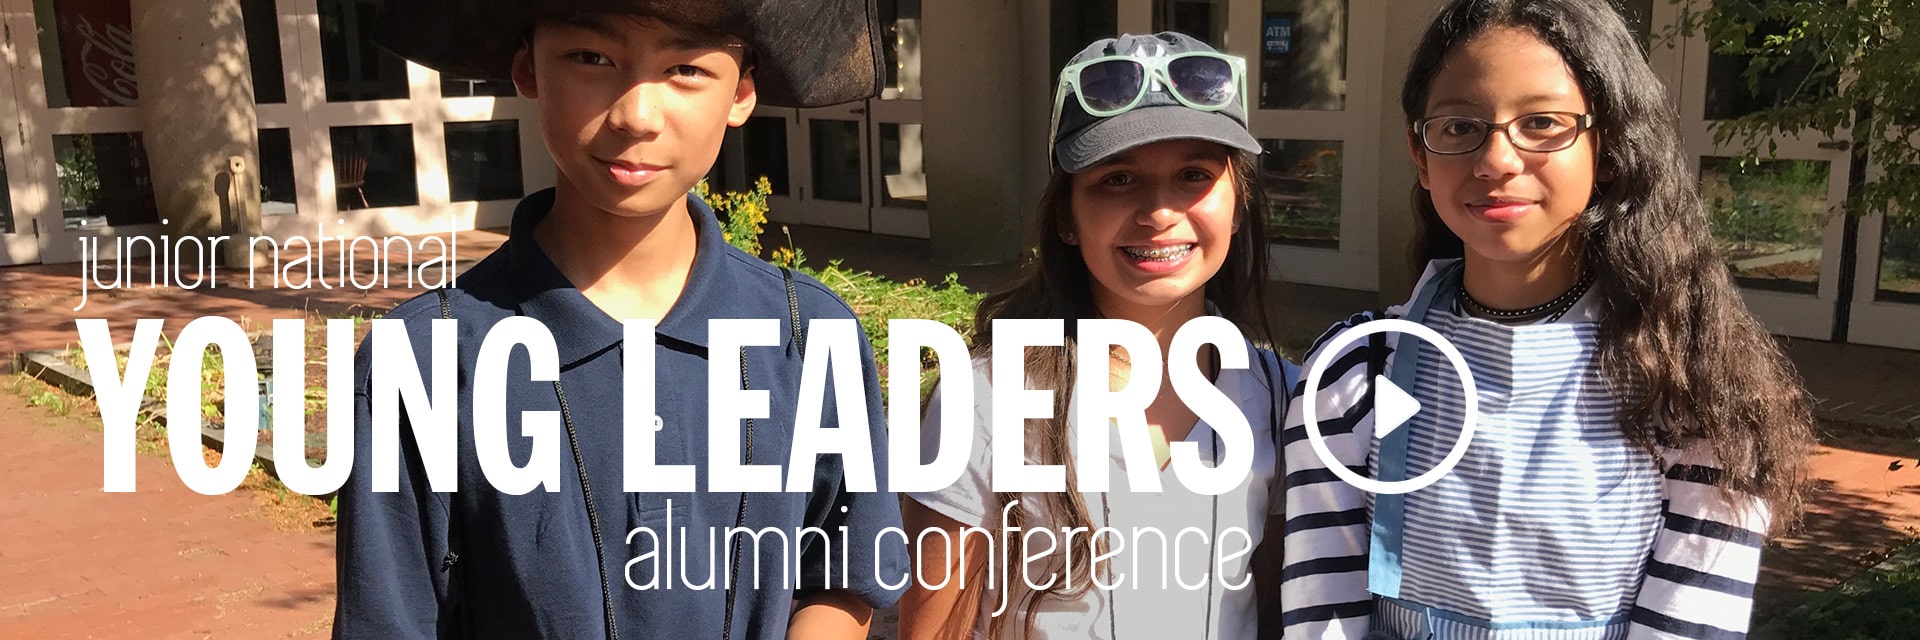 JrNYLC Alumni Conference for Middle School Students Video